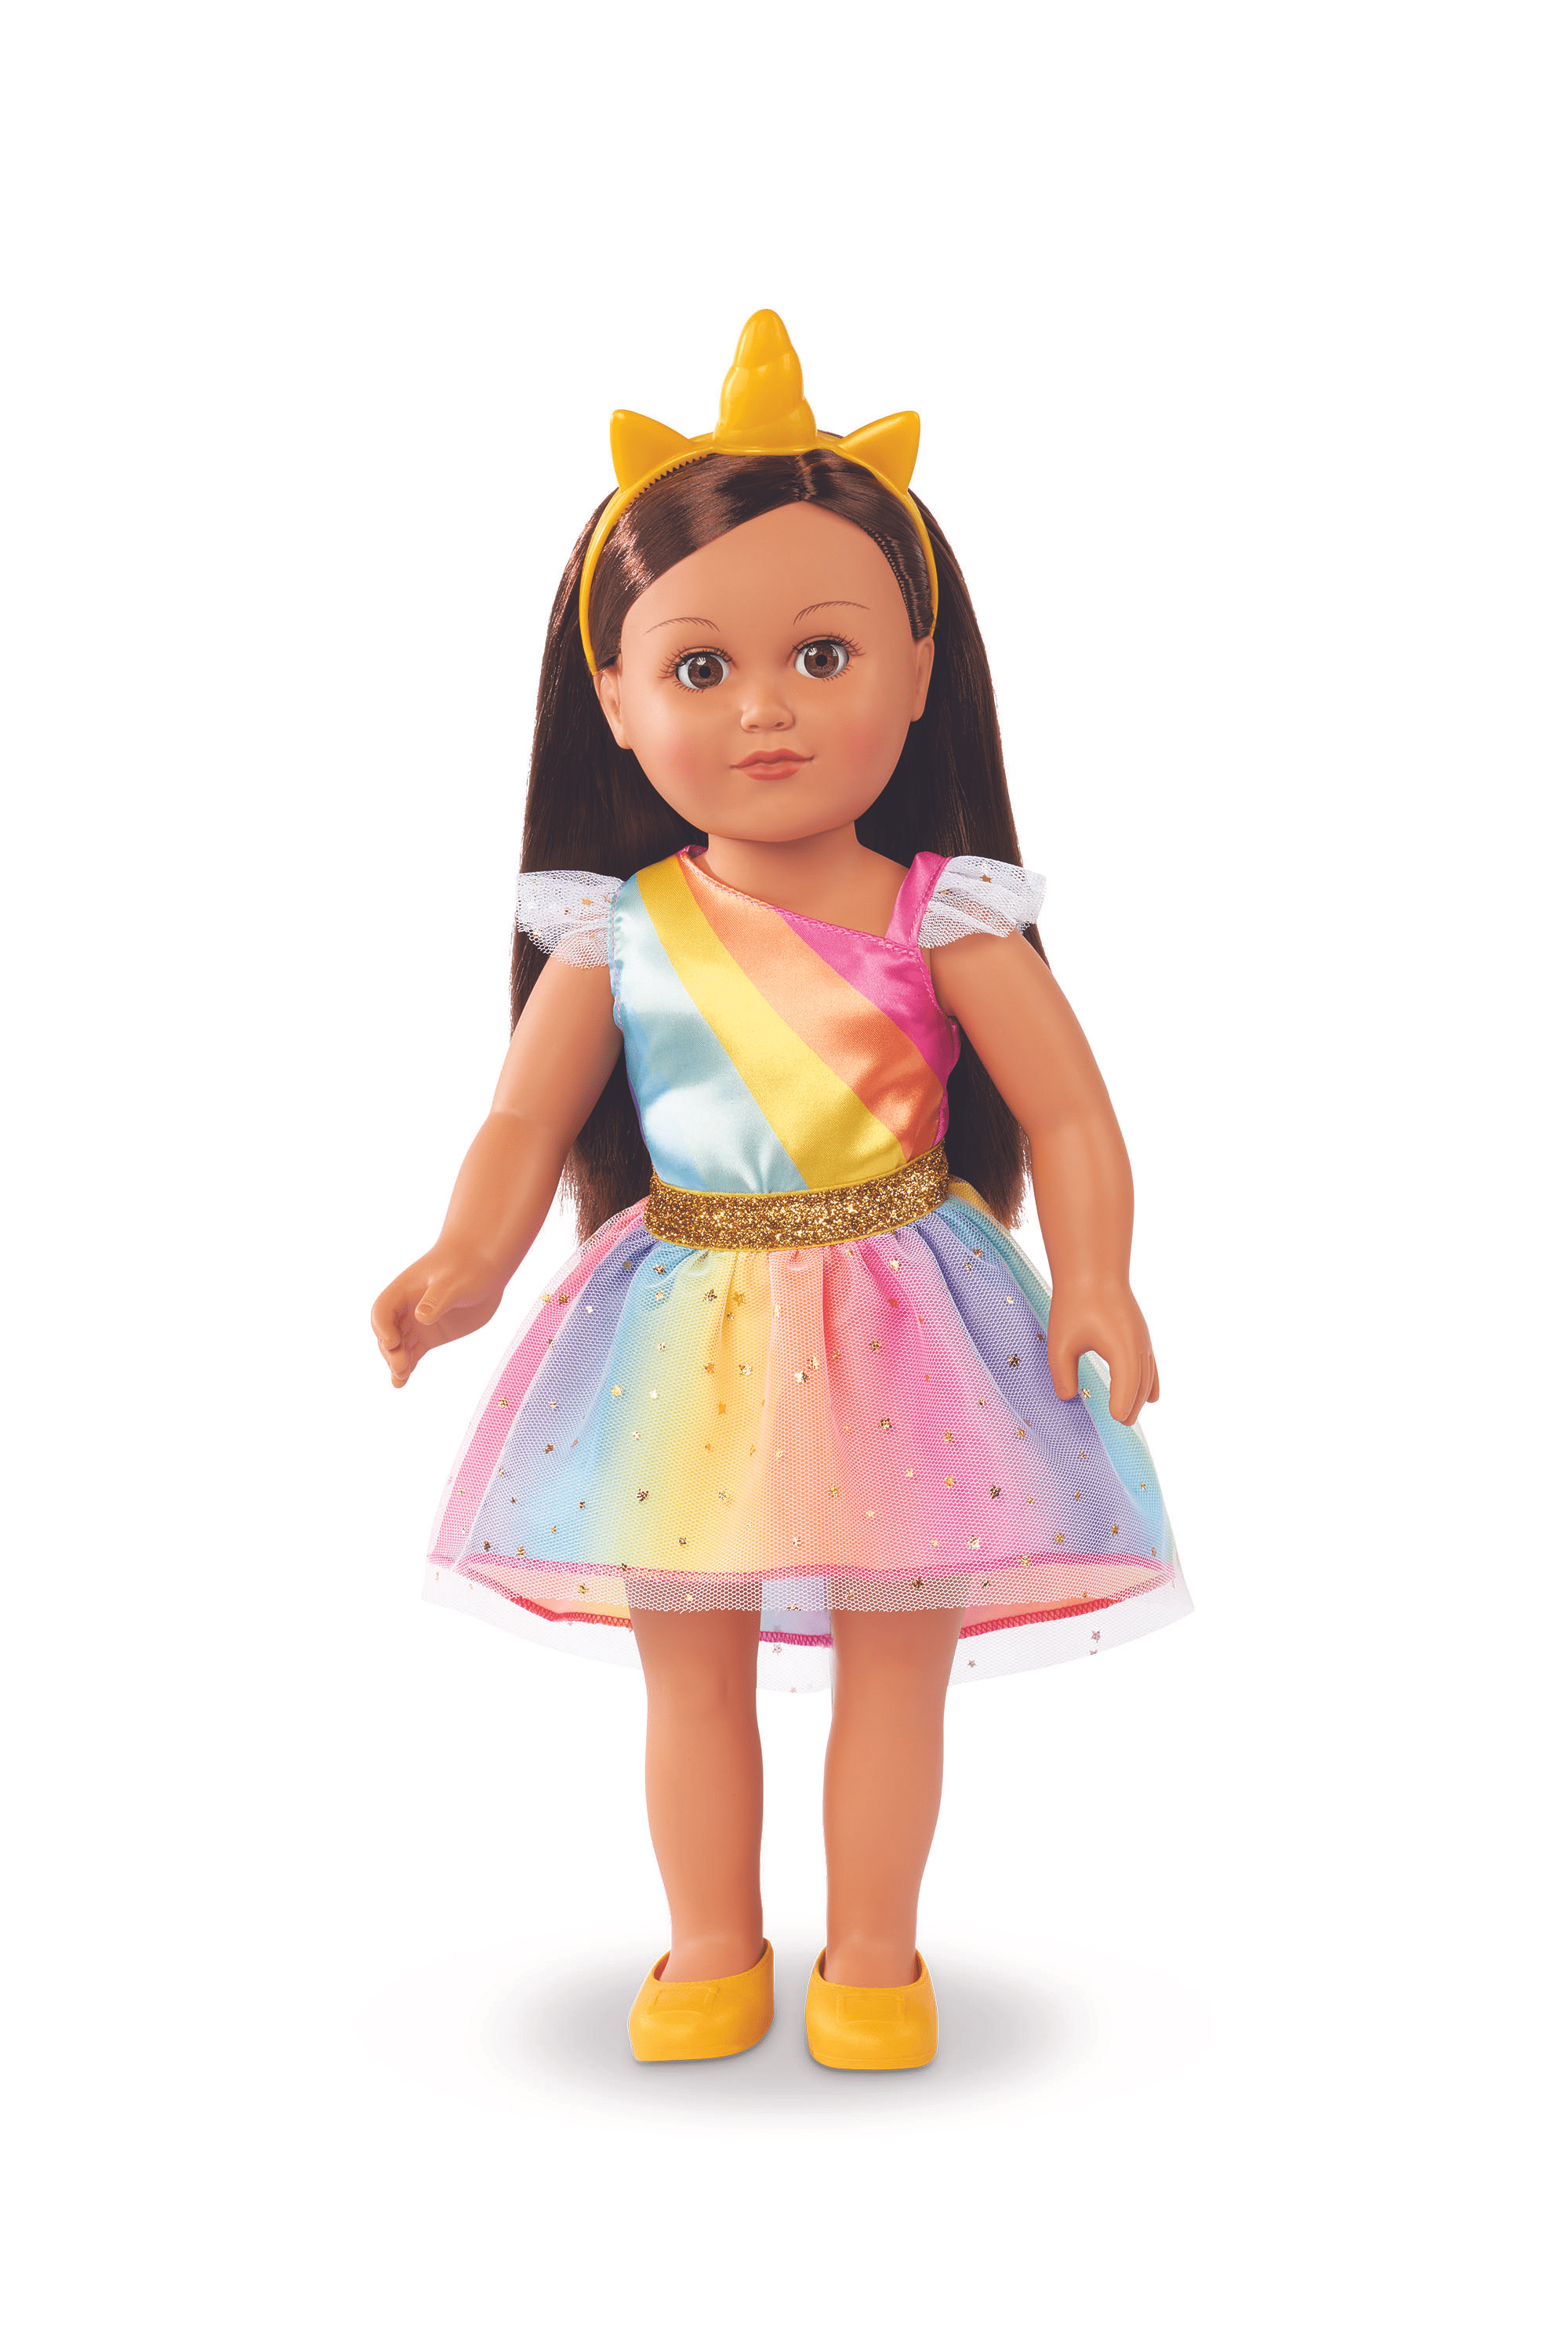 Our Generation Domenique Sparkles of Fun Styling Head Doll